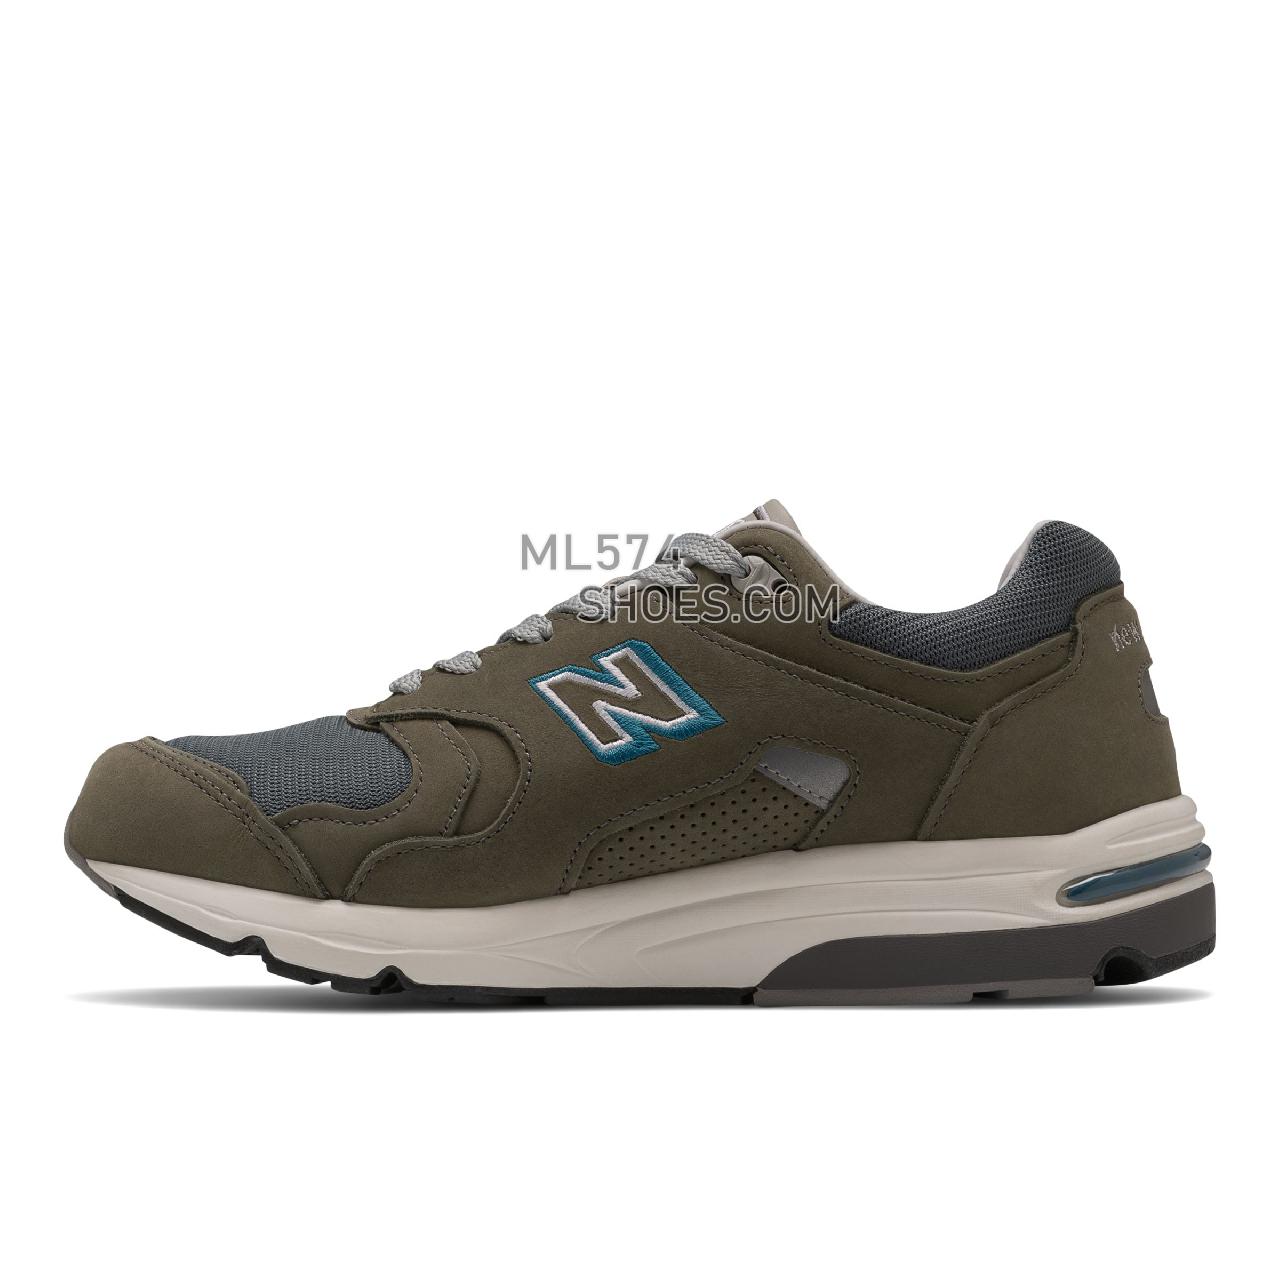 New Balance Made in USA 1700 - Men's Made in USA And UK Sneakers - Blue with Grey - M1700JP